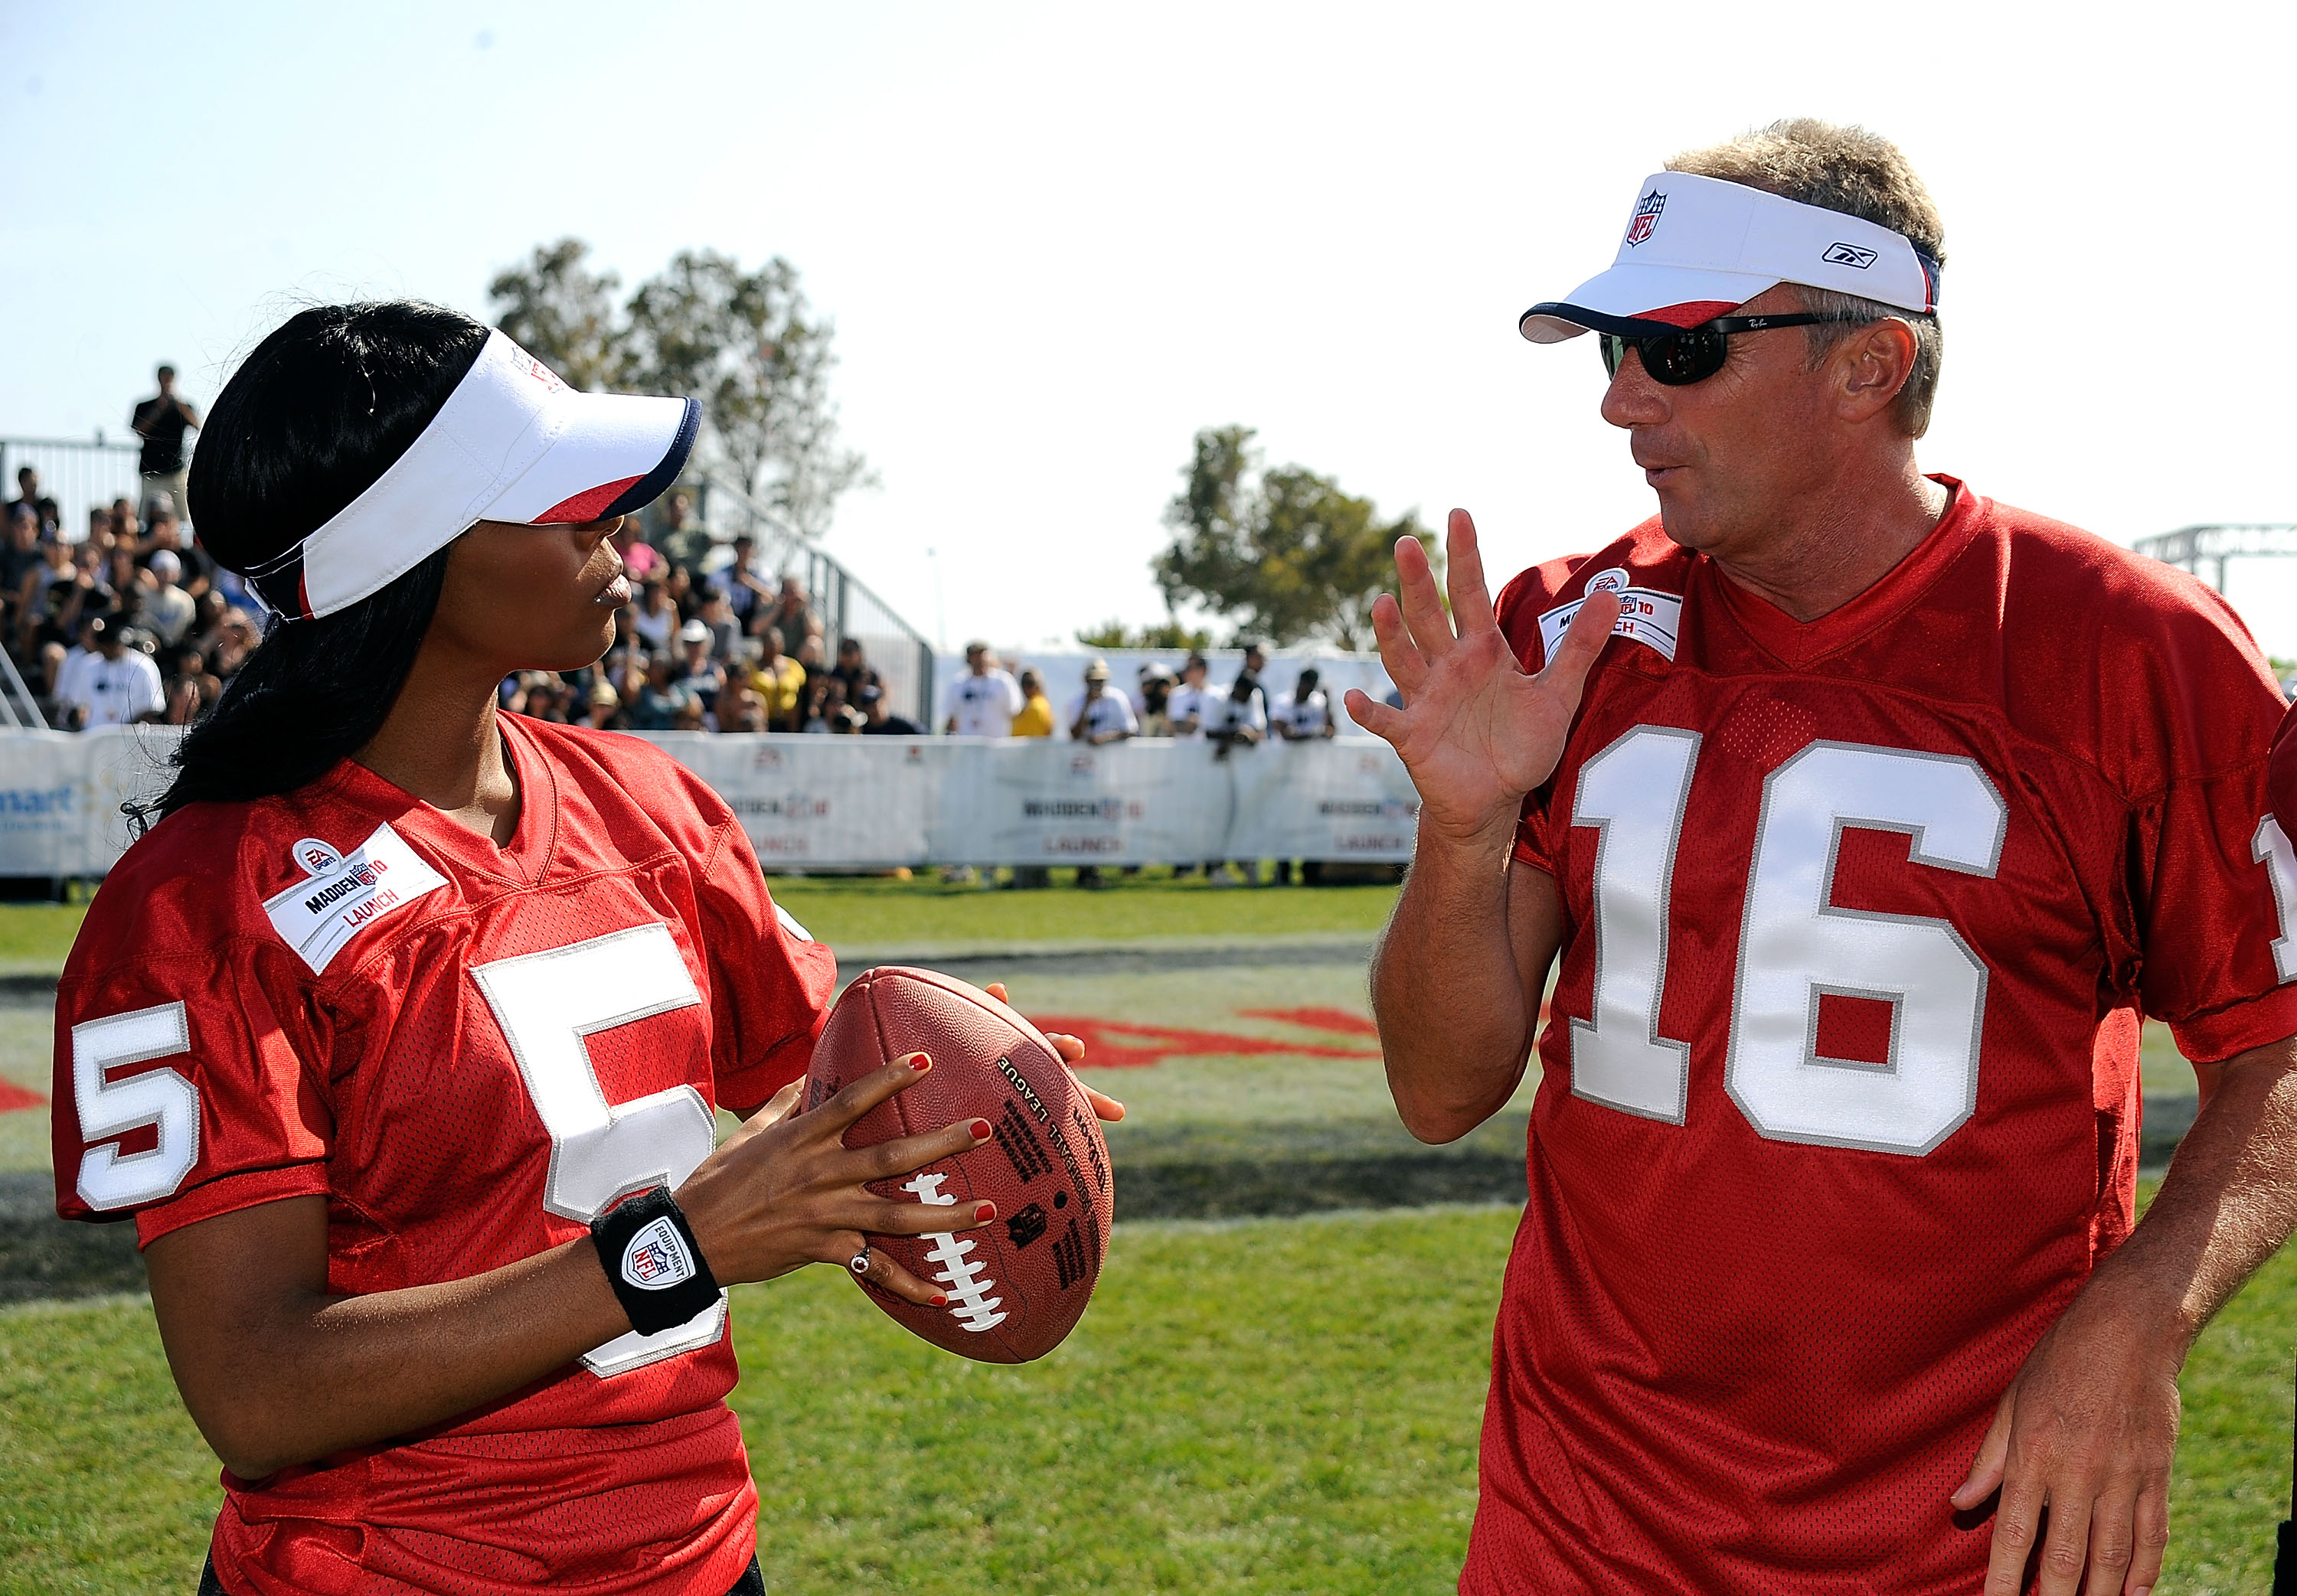 MALIBU, CA - JULY 24:Singer Kelly Rowland gets tips from Joe Montana, athlete at the Madden NFL 10 Pigskiin Pro-Am on Xbox 360 event  on July 24, 2009 in Malibu, California.  (Photo by Frazer Harrison/Getty Images)